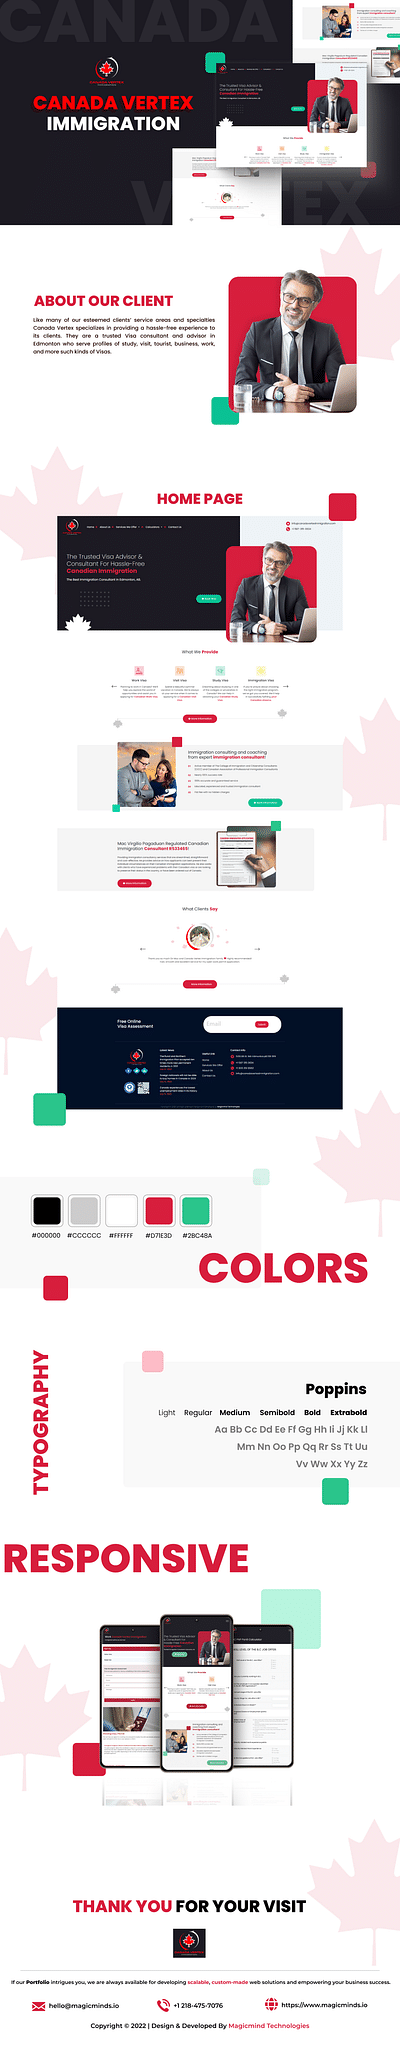 Canada Vertex: Website for Immigration Consultants - Web Application